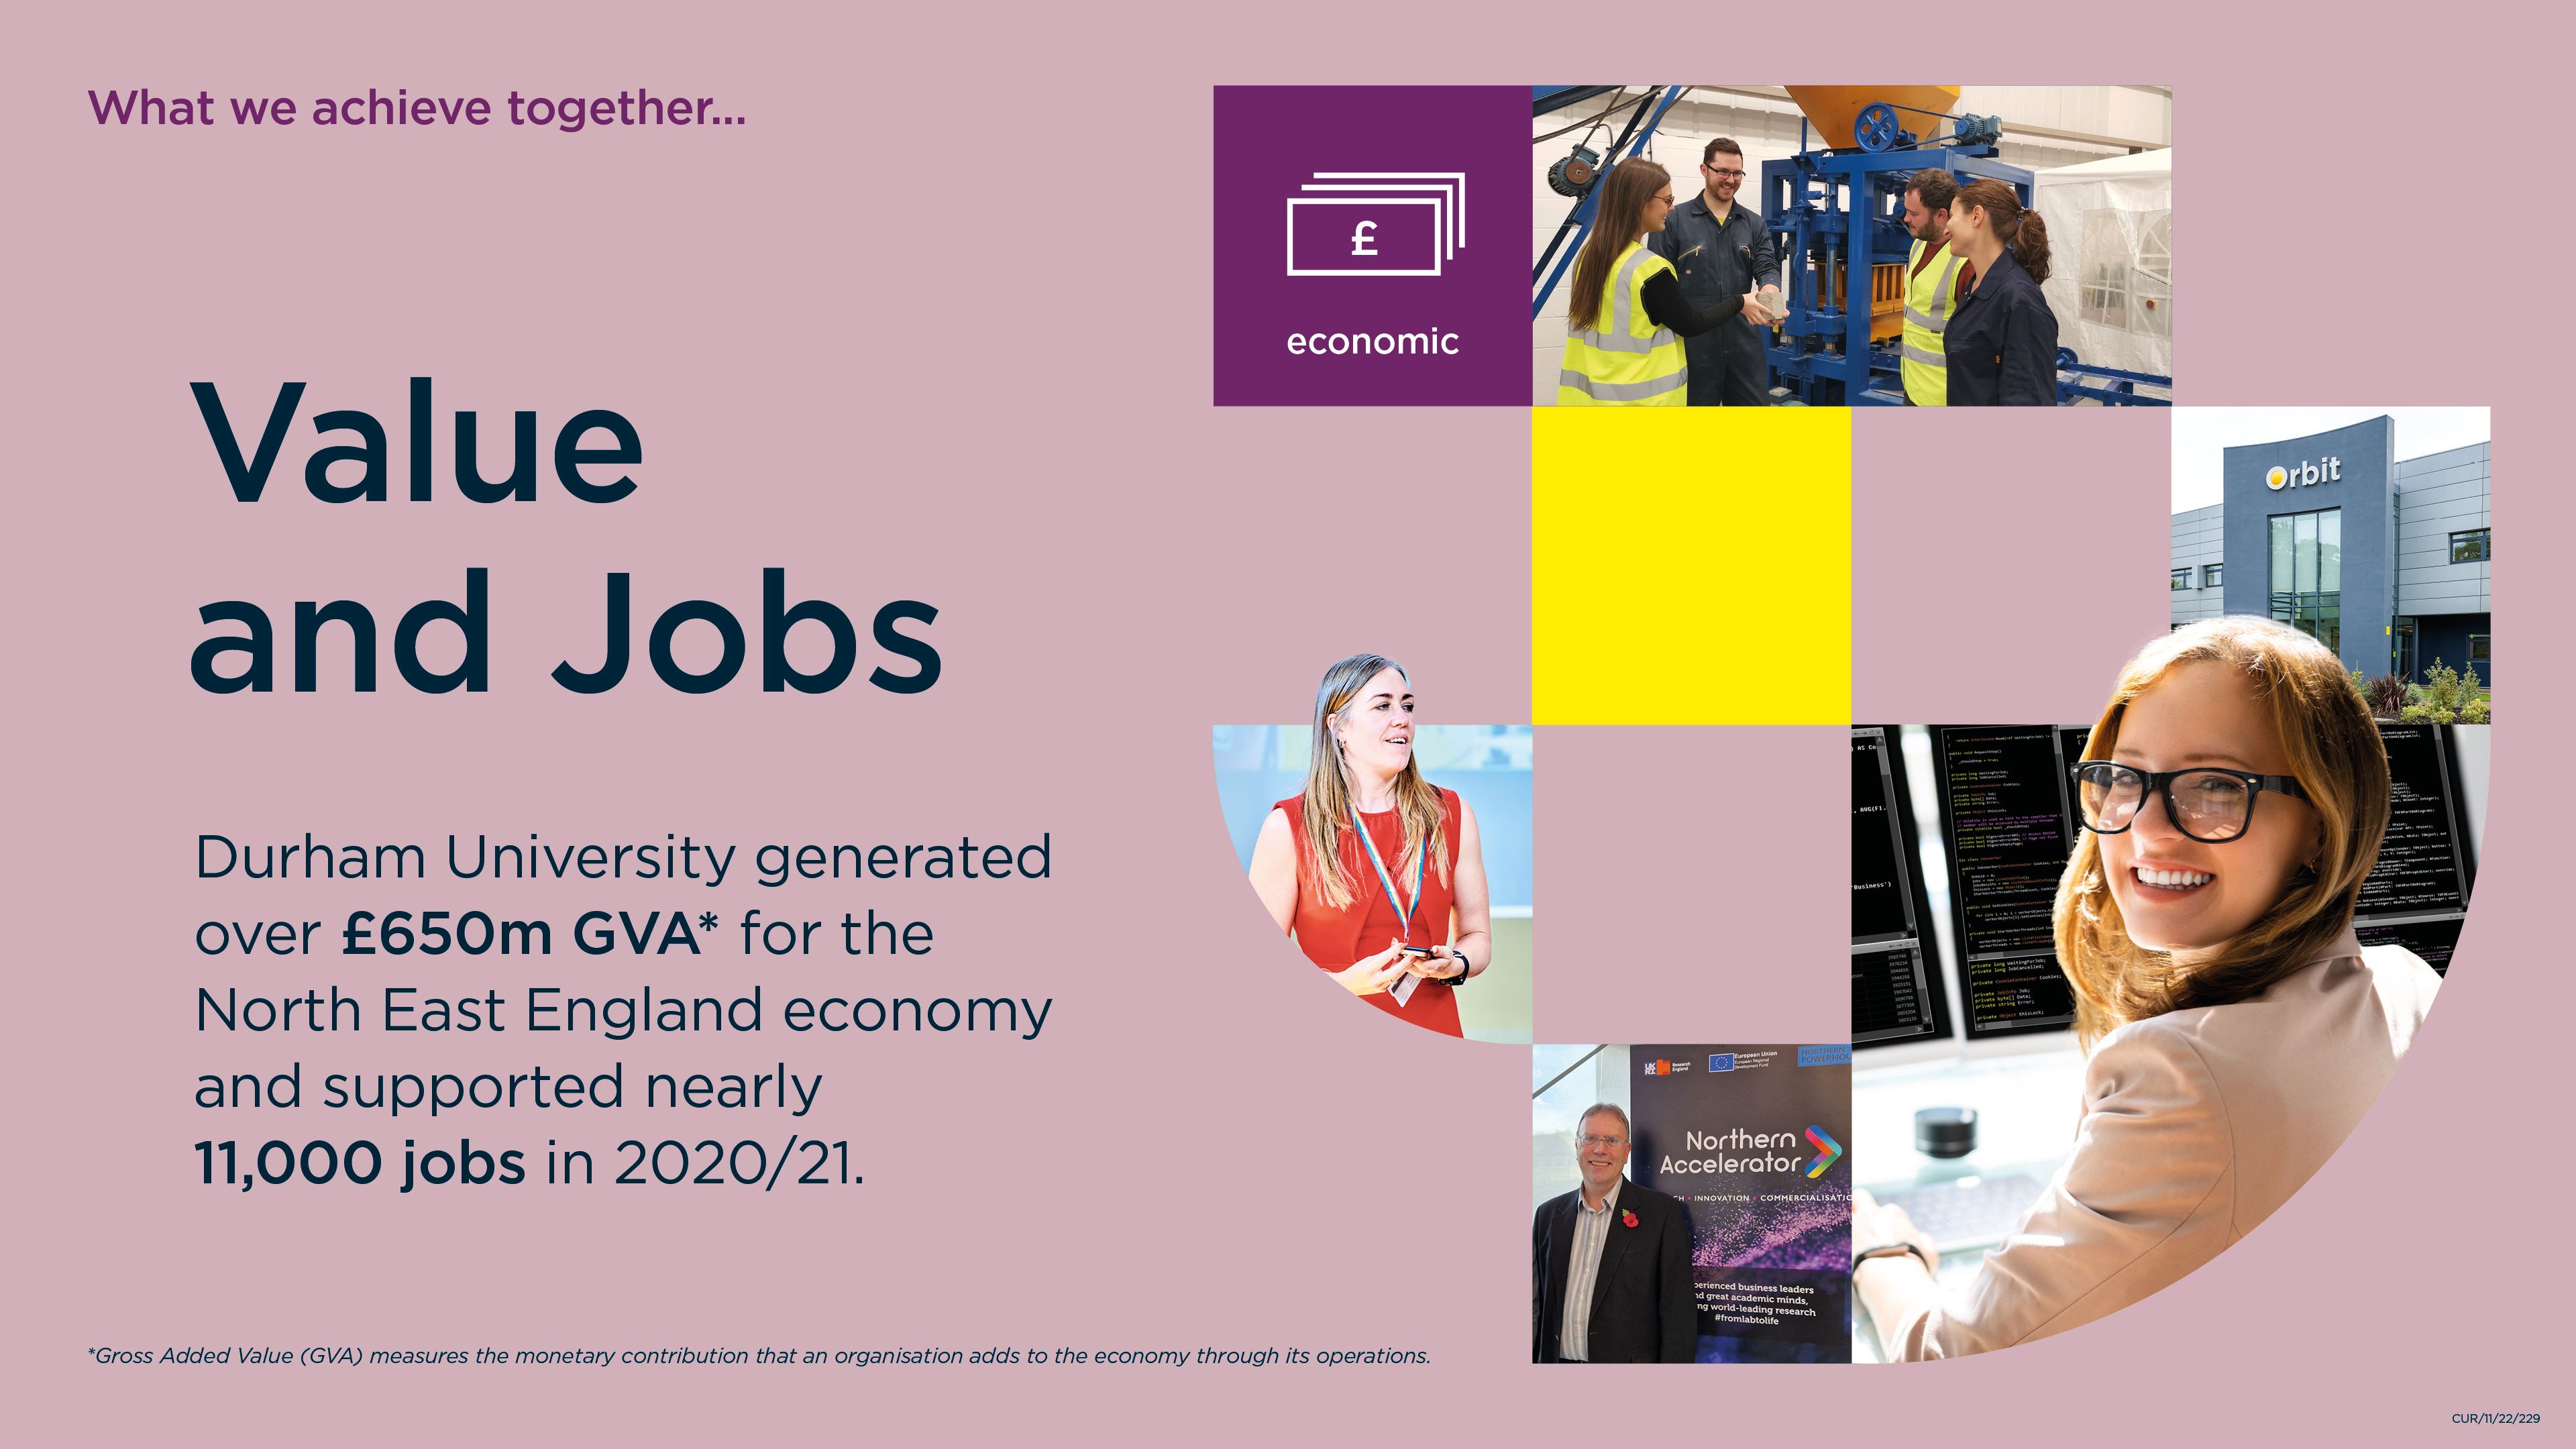 Infographic: Durham University generated over £650m GVA for the North East England economy and supported nearly 11,000 jobs in 2020/21